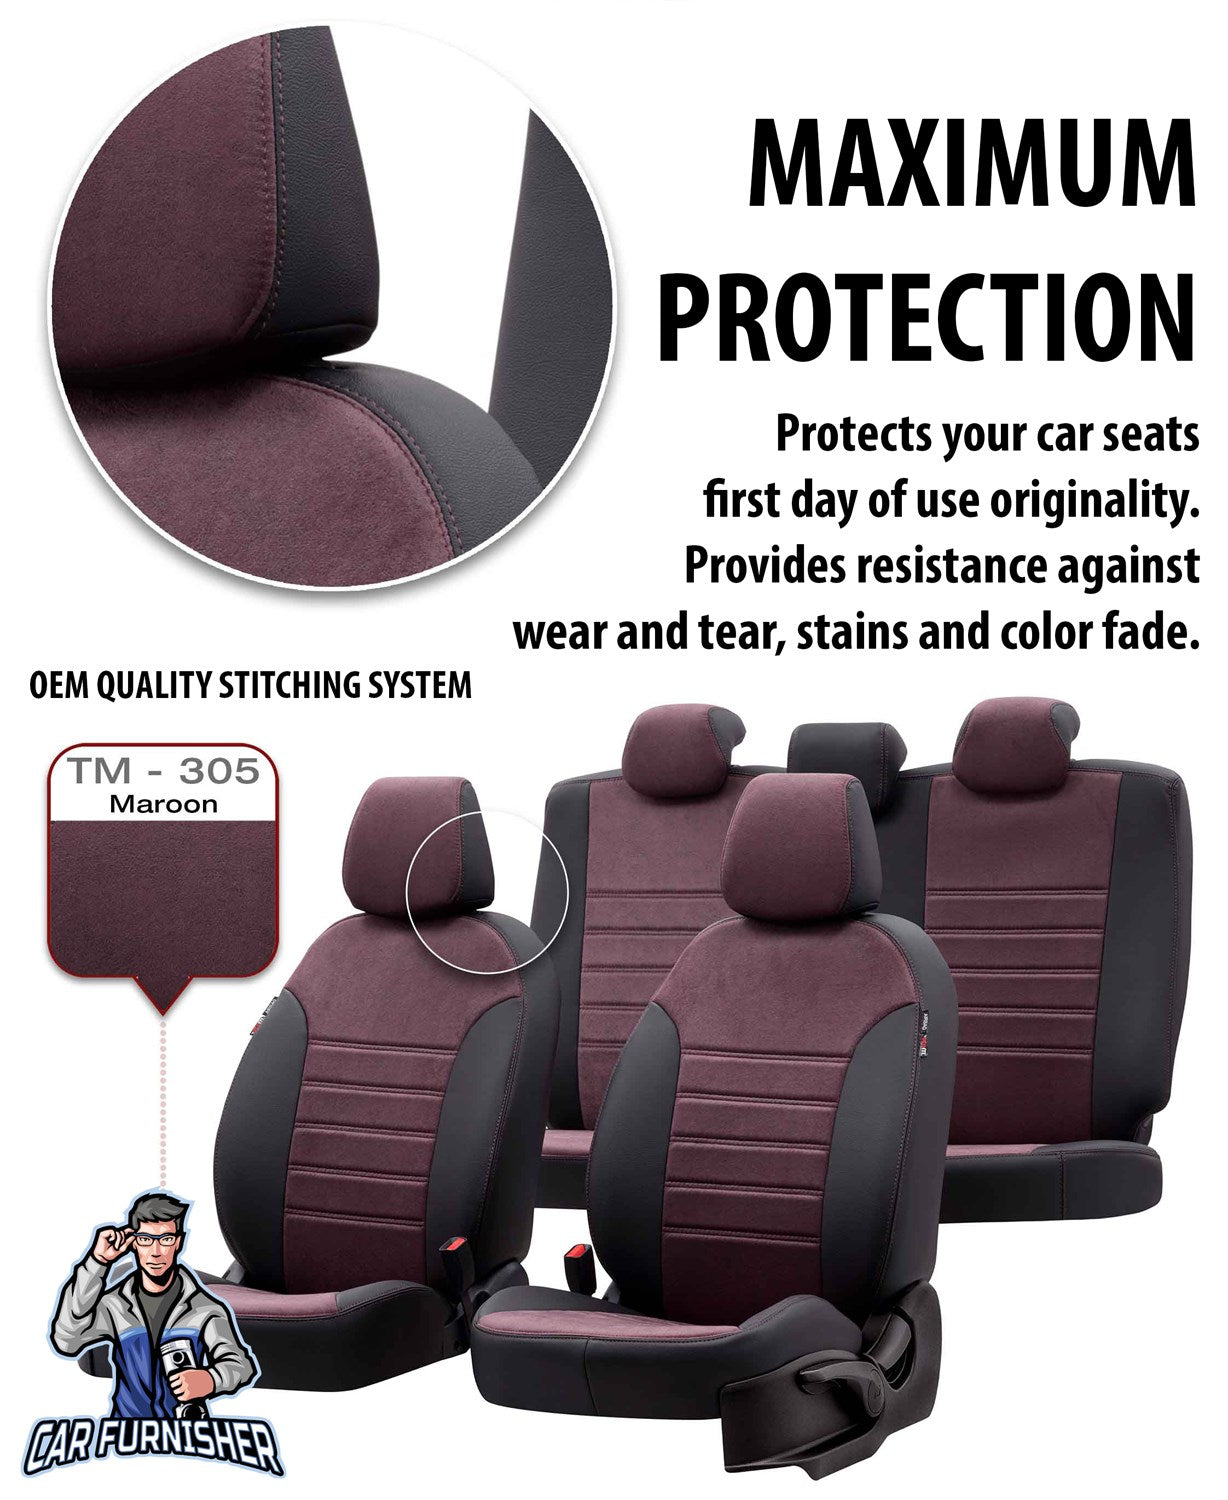 Hyundai i10 Seat Covers Milano Suede Design Burgundy Leather & Suede Fabric